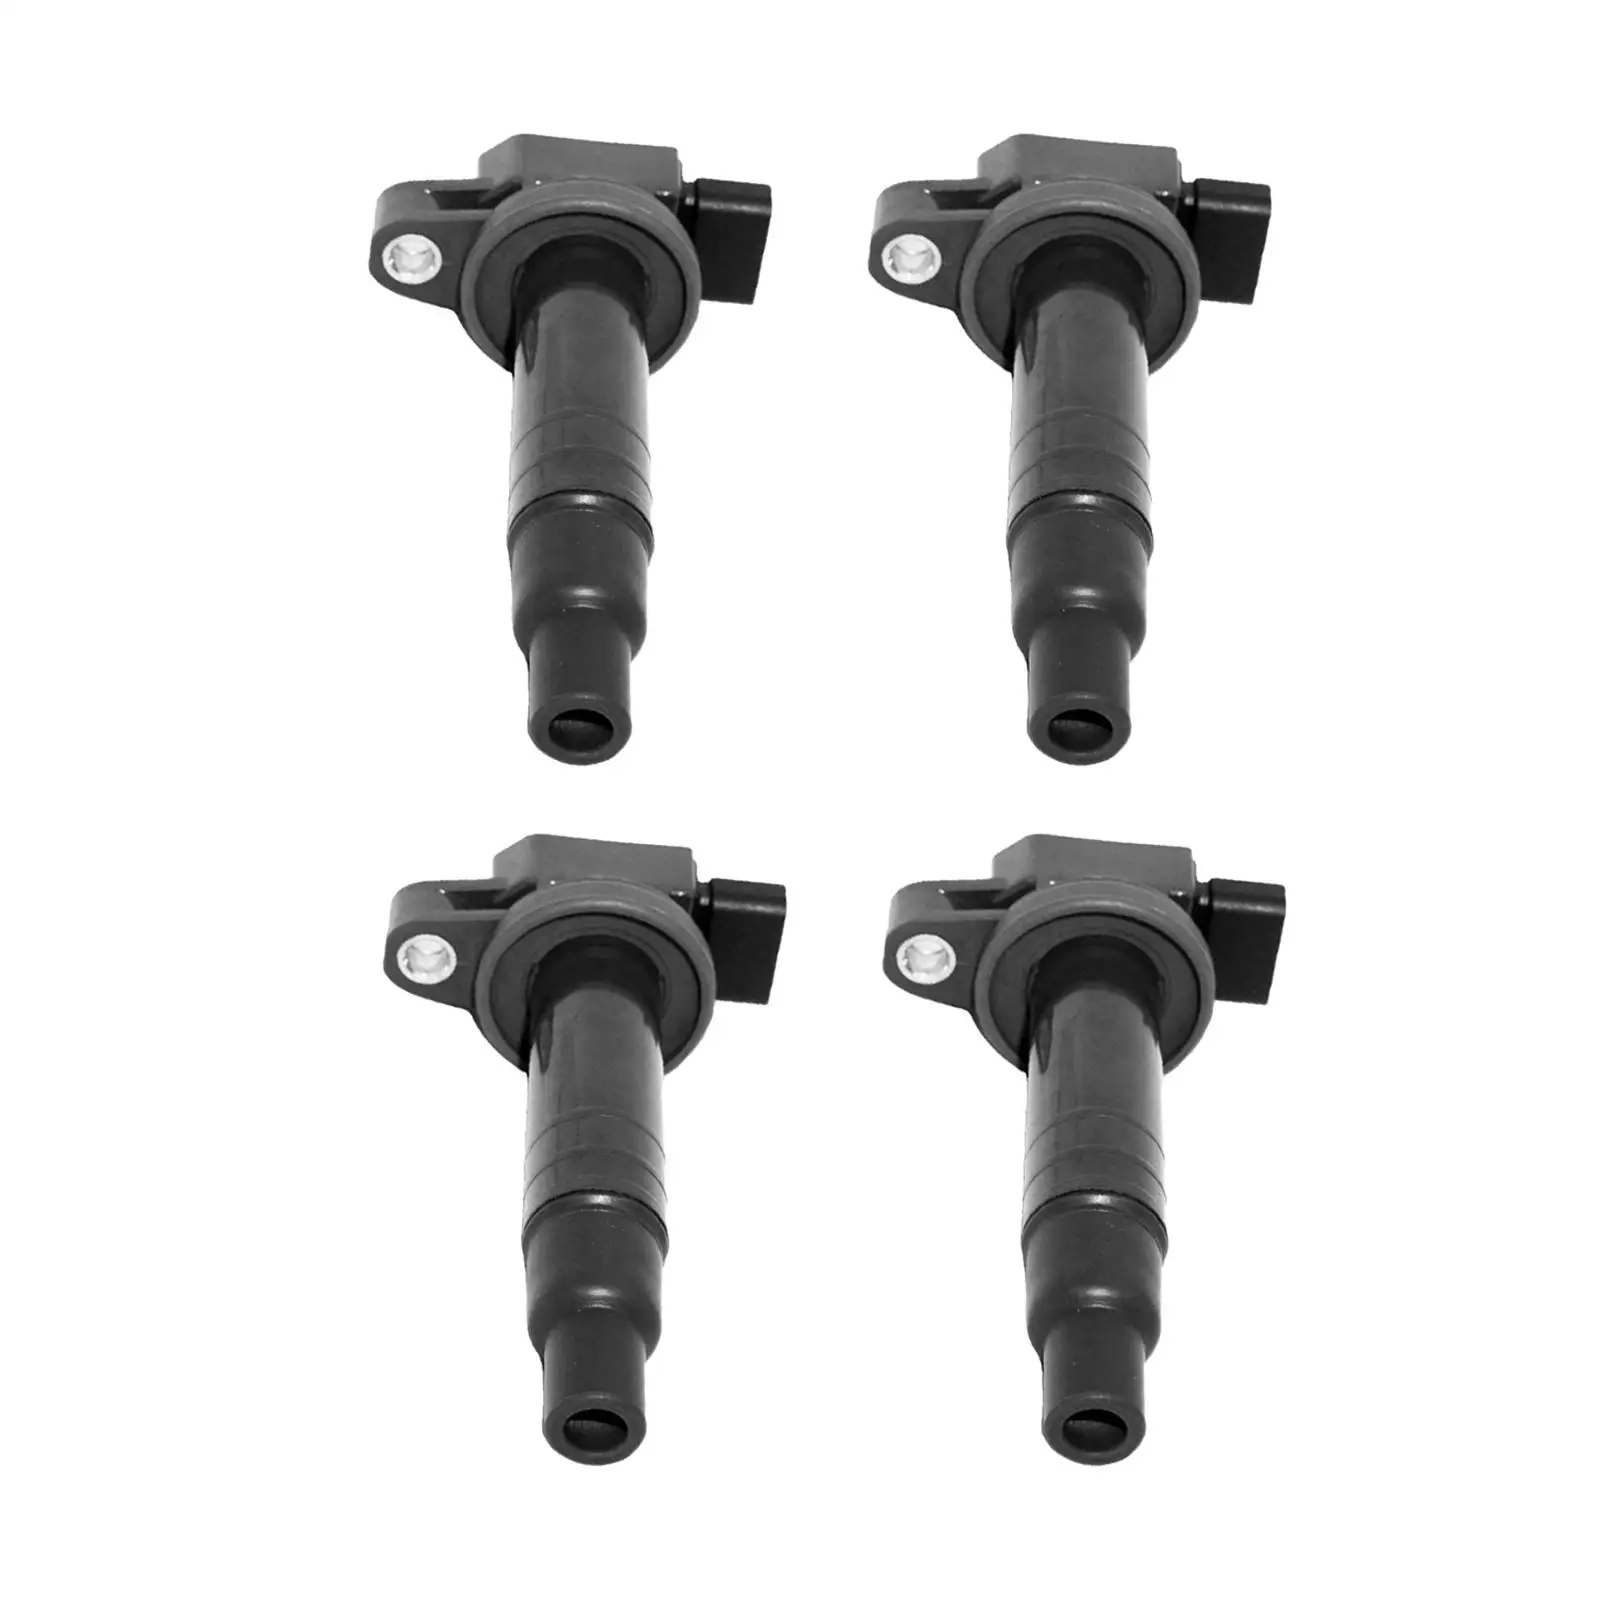 4Pcs Ignition Coils 90919-02240 Durable Easy to Install Repair Parts Professional for Toyota 1.5L Yaris Echo uf316 for prius